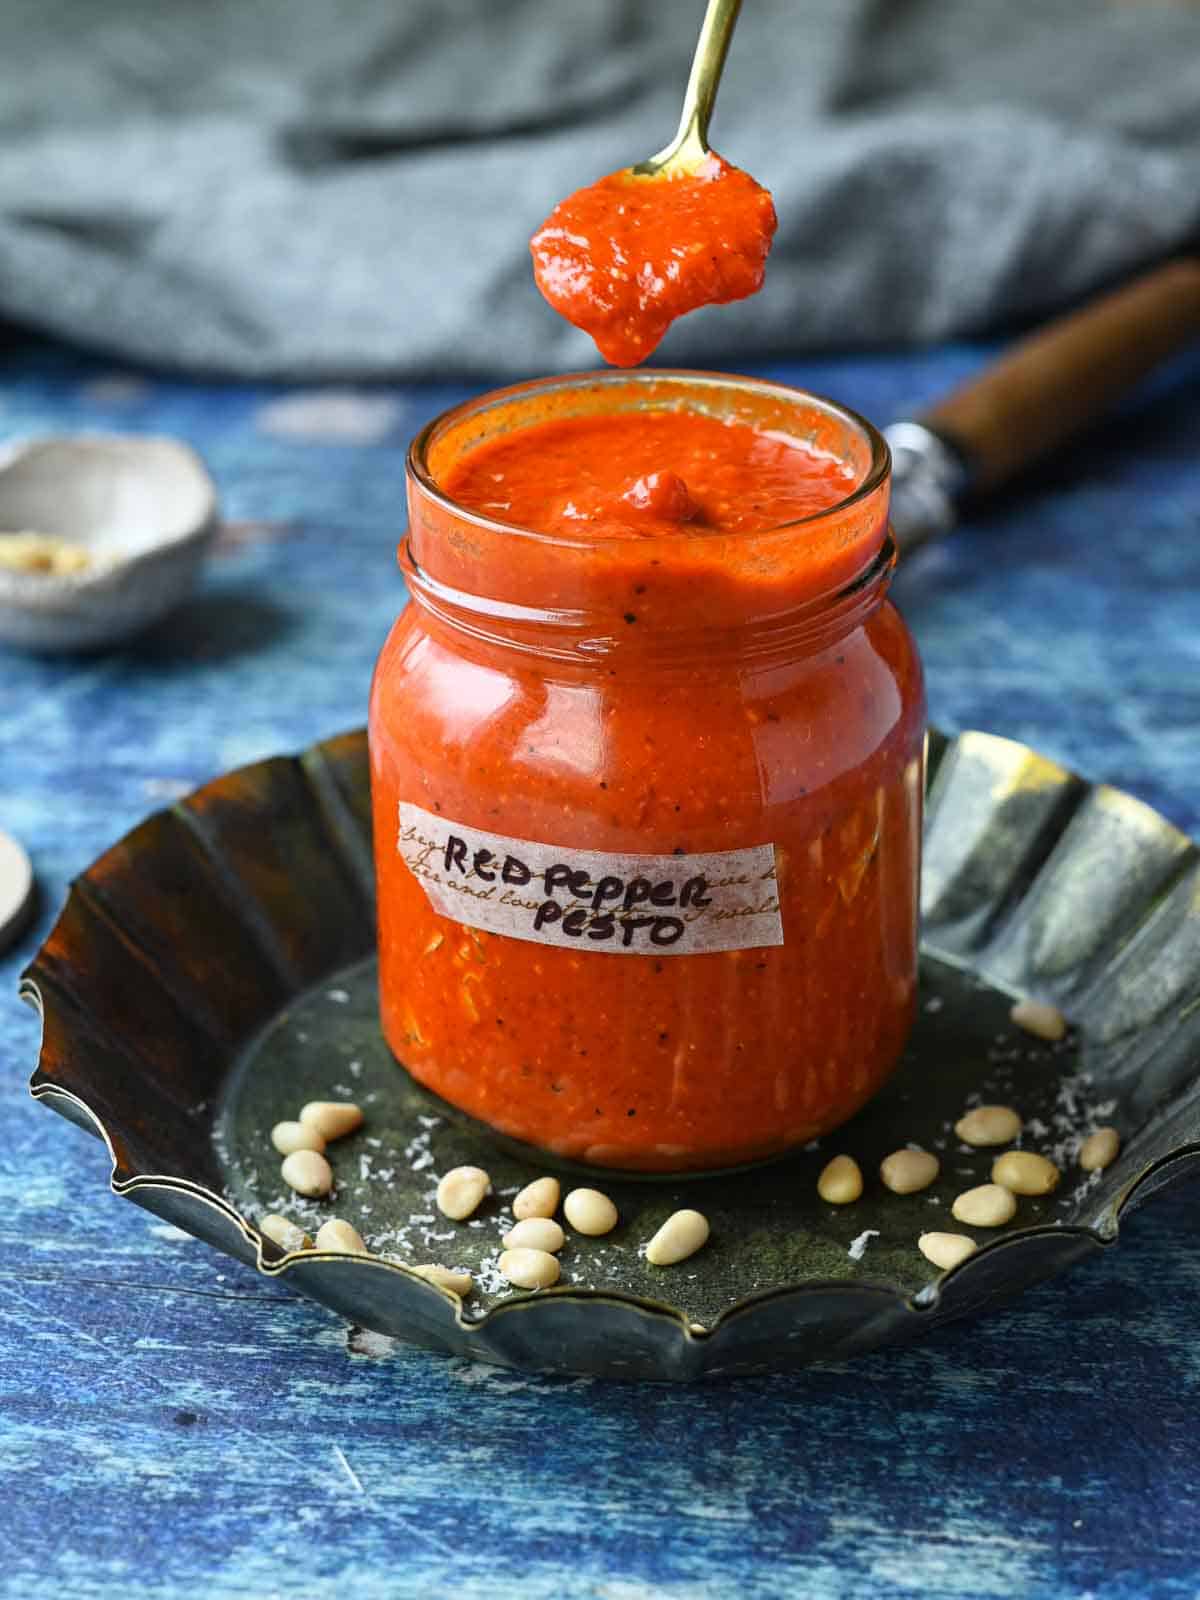 Red pepper pesto sauce in a jar with a spoon in it dripping into the jar.